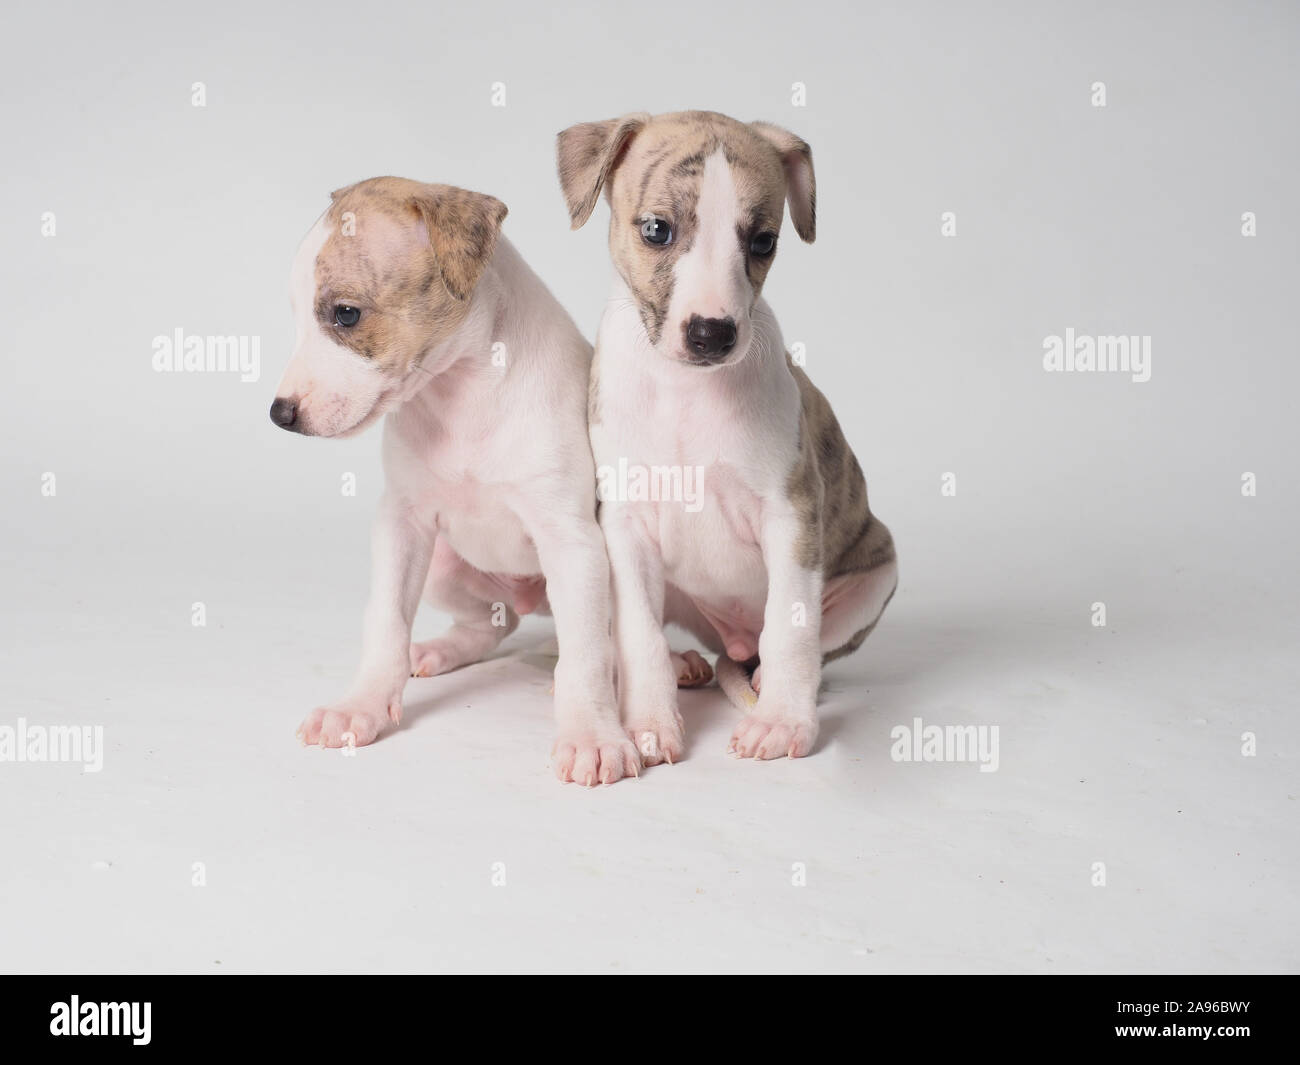 Two puppy of whippets dog breed with 36 days old tabby and white Stock Photo